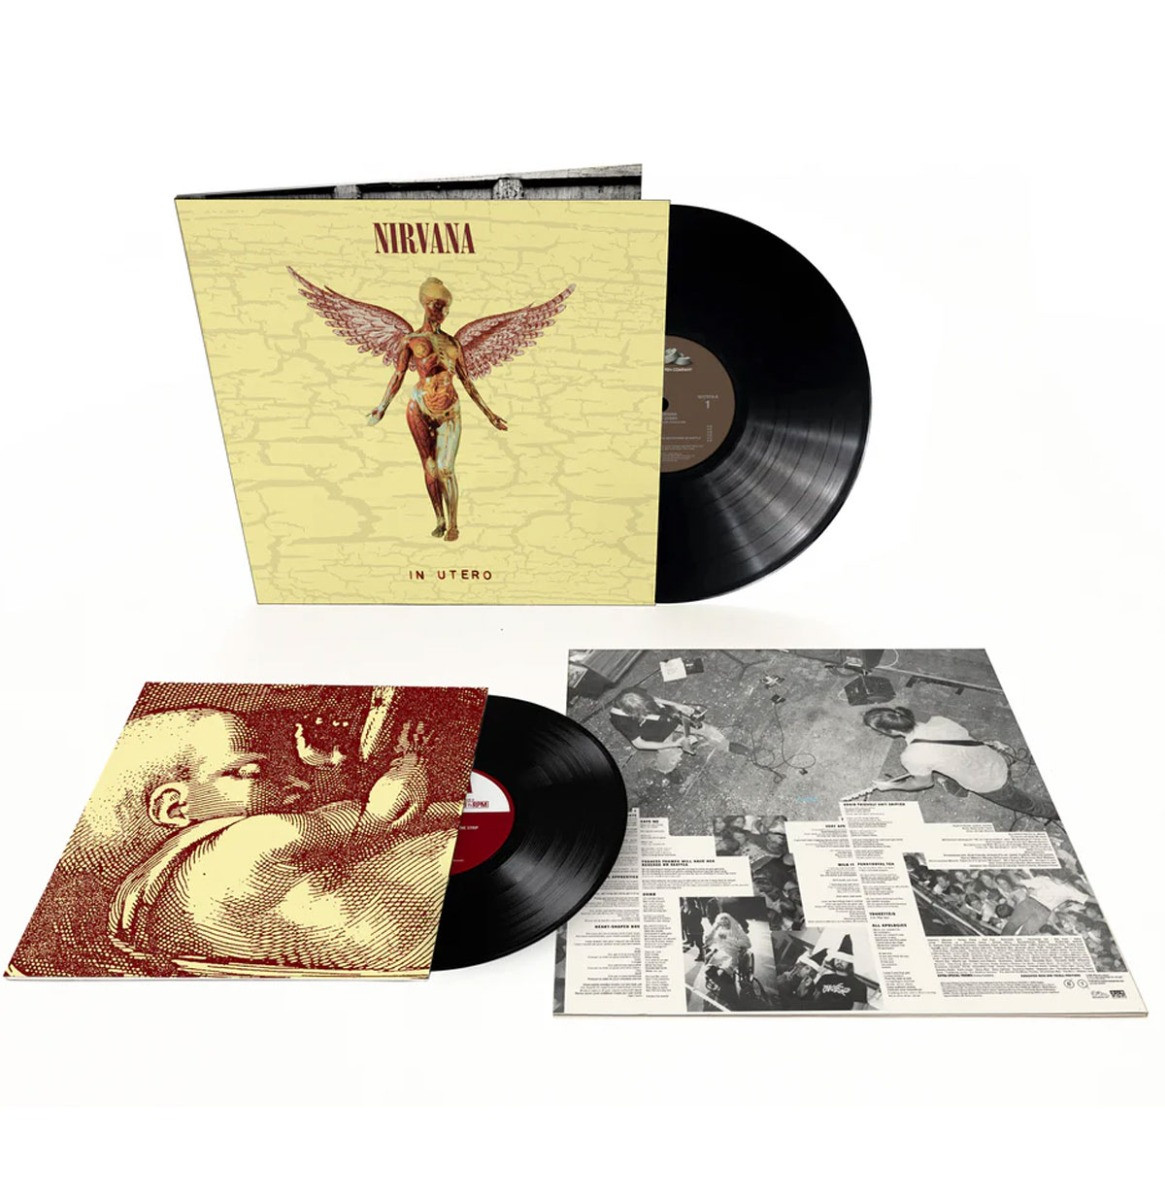 Nirvana - In Utero (Limited Edition 12inch + 10 Inch) 2LP